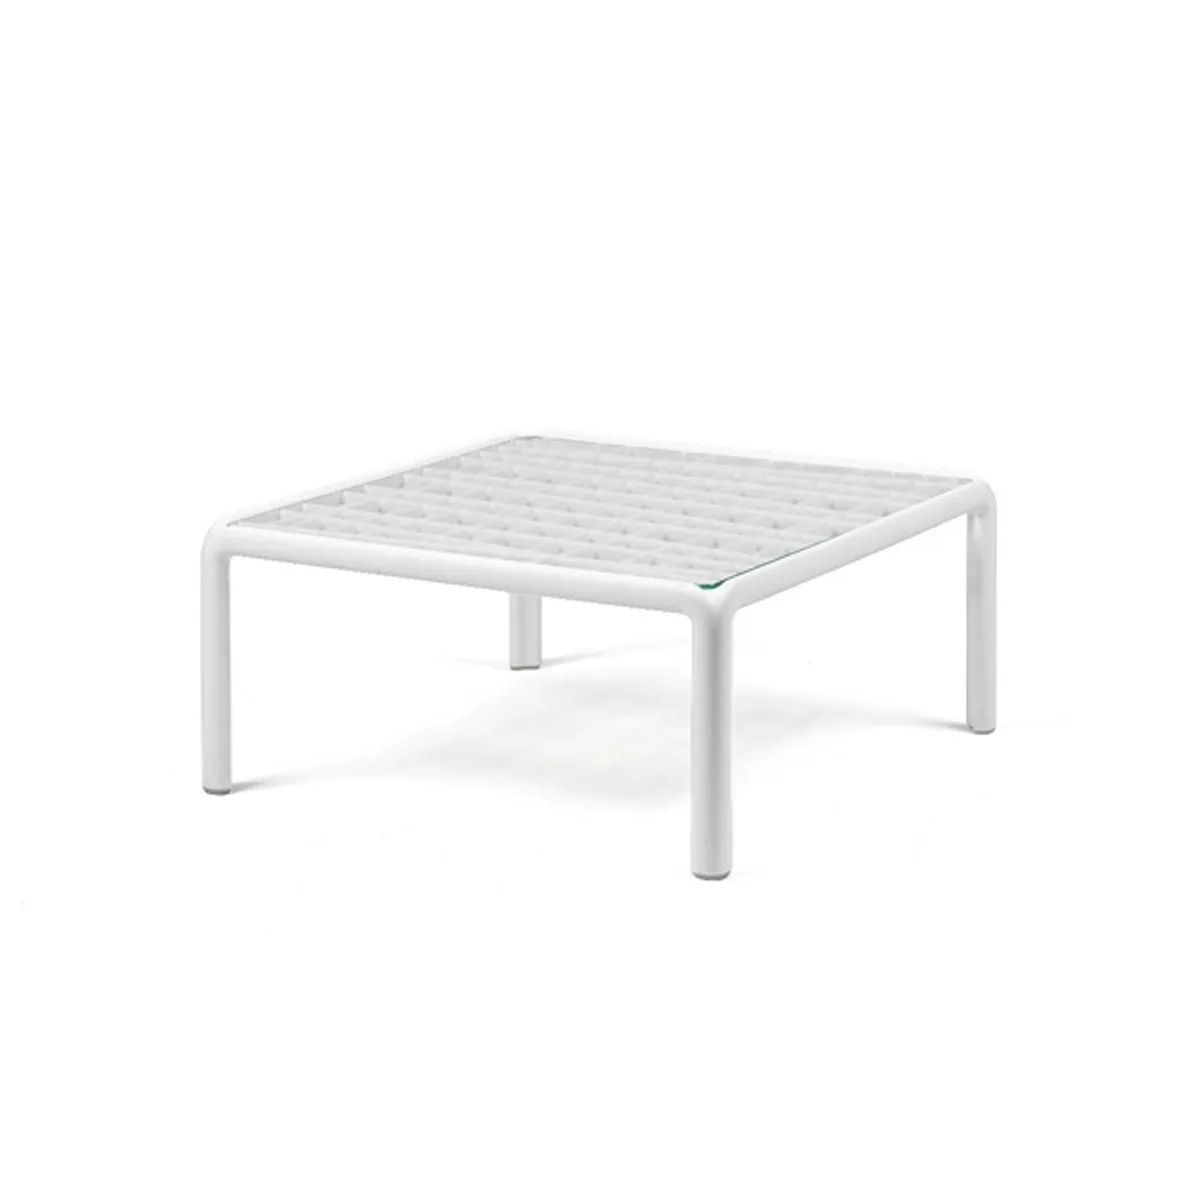 Komodo glass coffee table Inside Out Contracts3